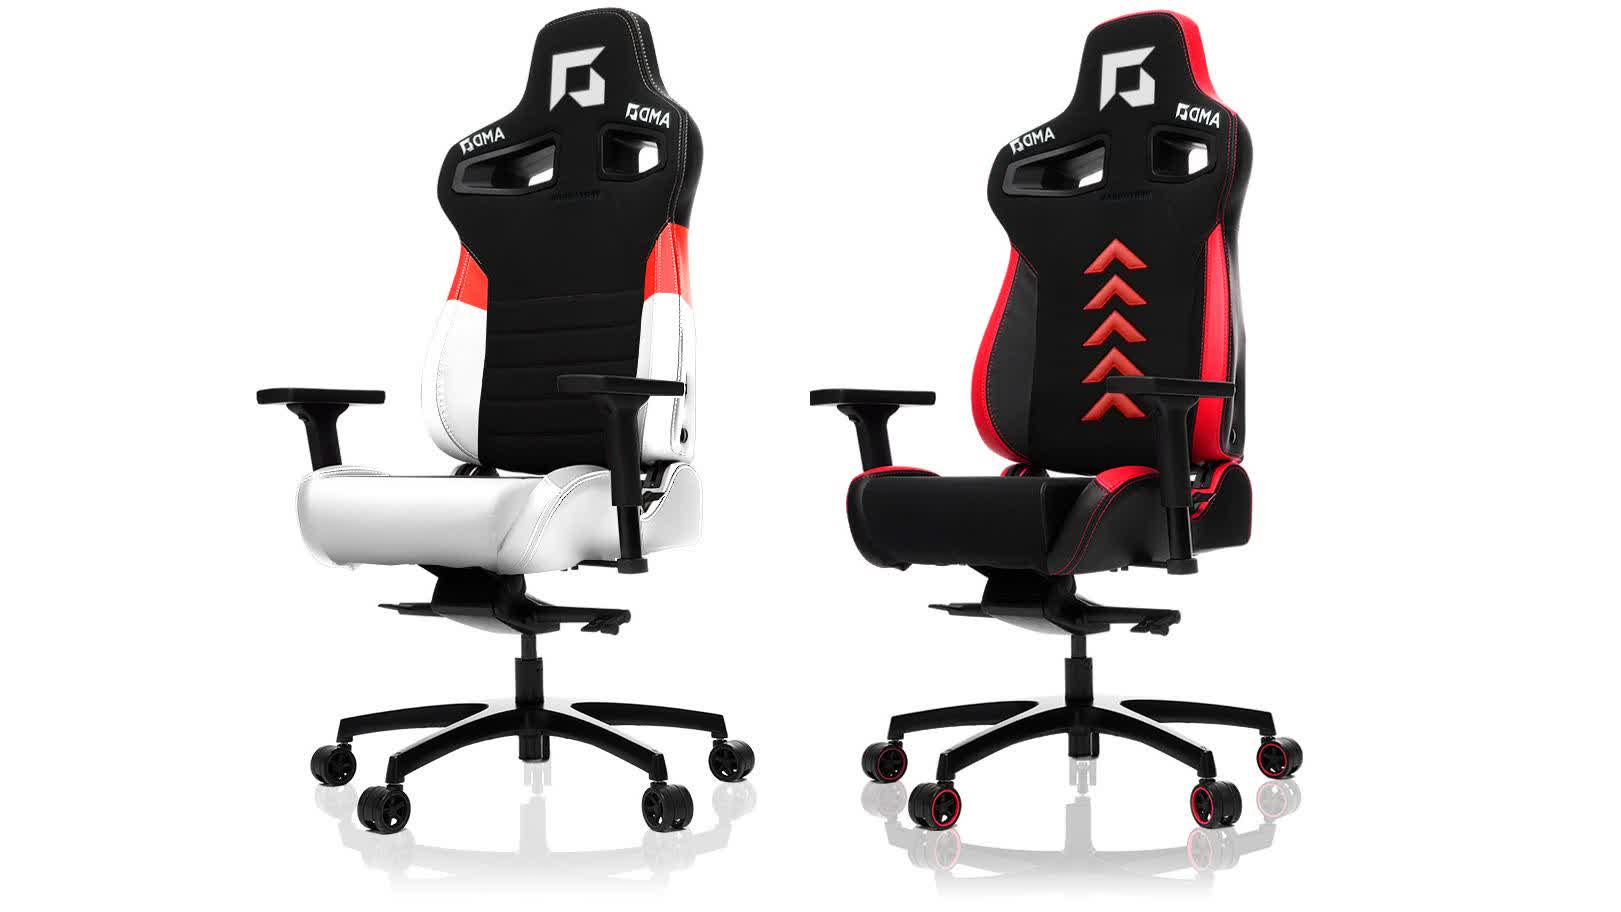 You can now buy an AMD gaming chair with optional RGB lights for $549